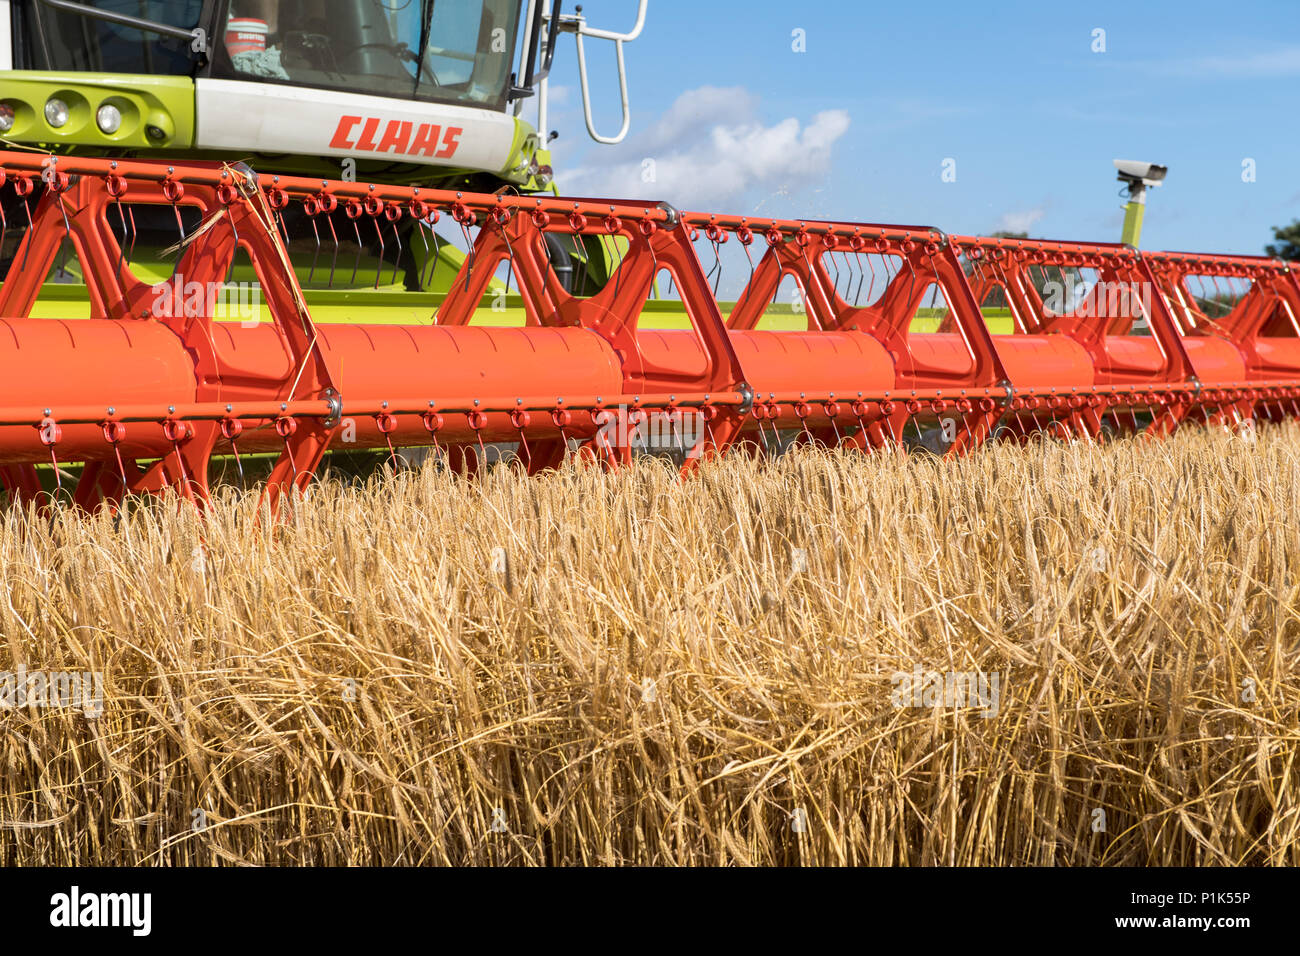 Close up of a Claas V900 35ft combine head with attached cameras, at work, harvesting barley. North Yorkshire, UK. Stock Photo